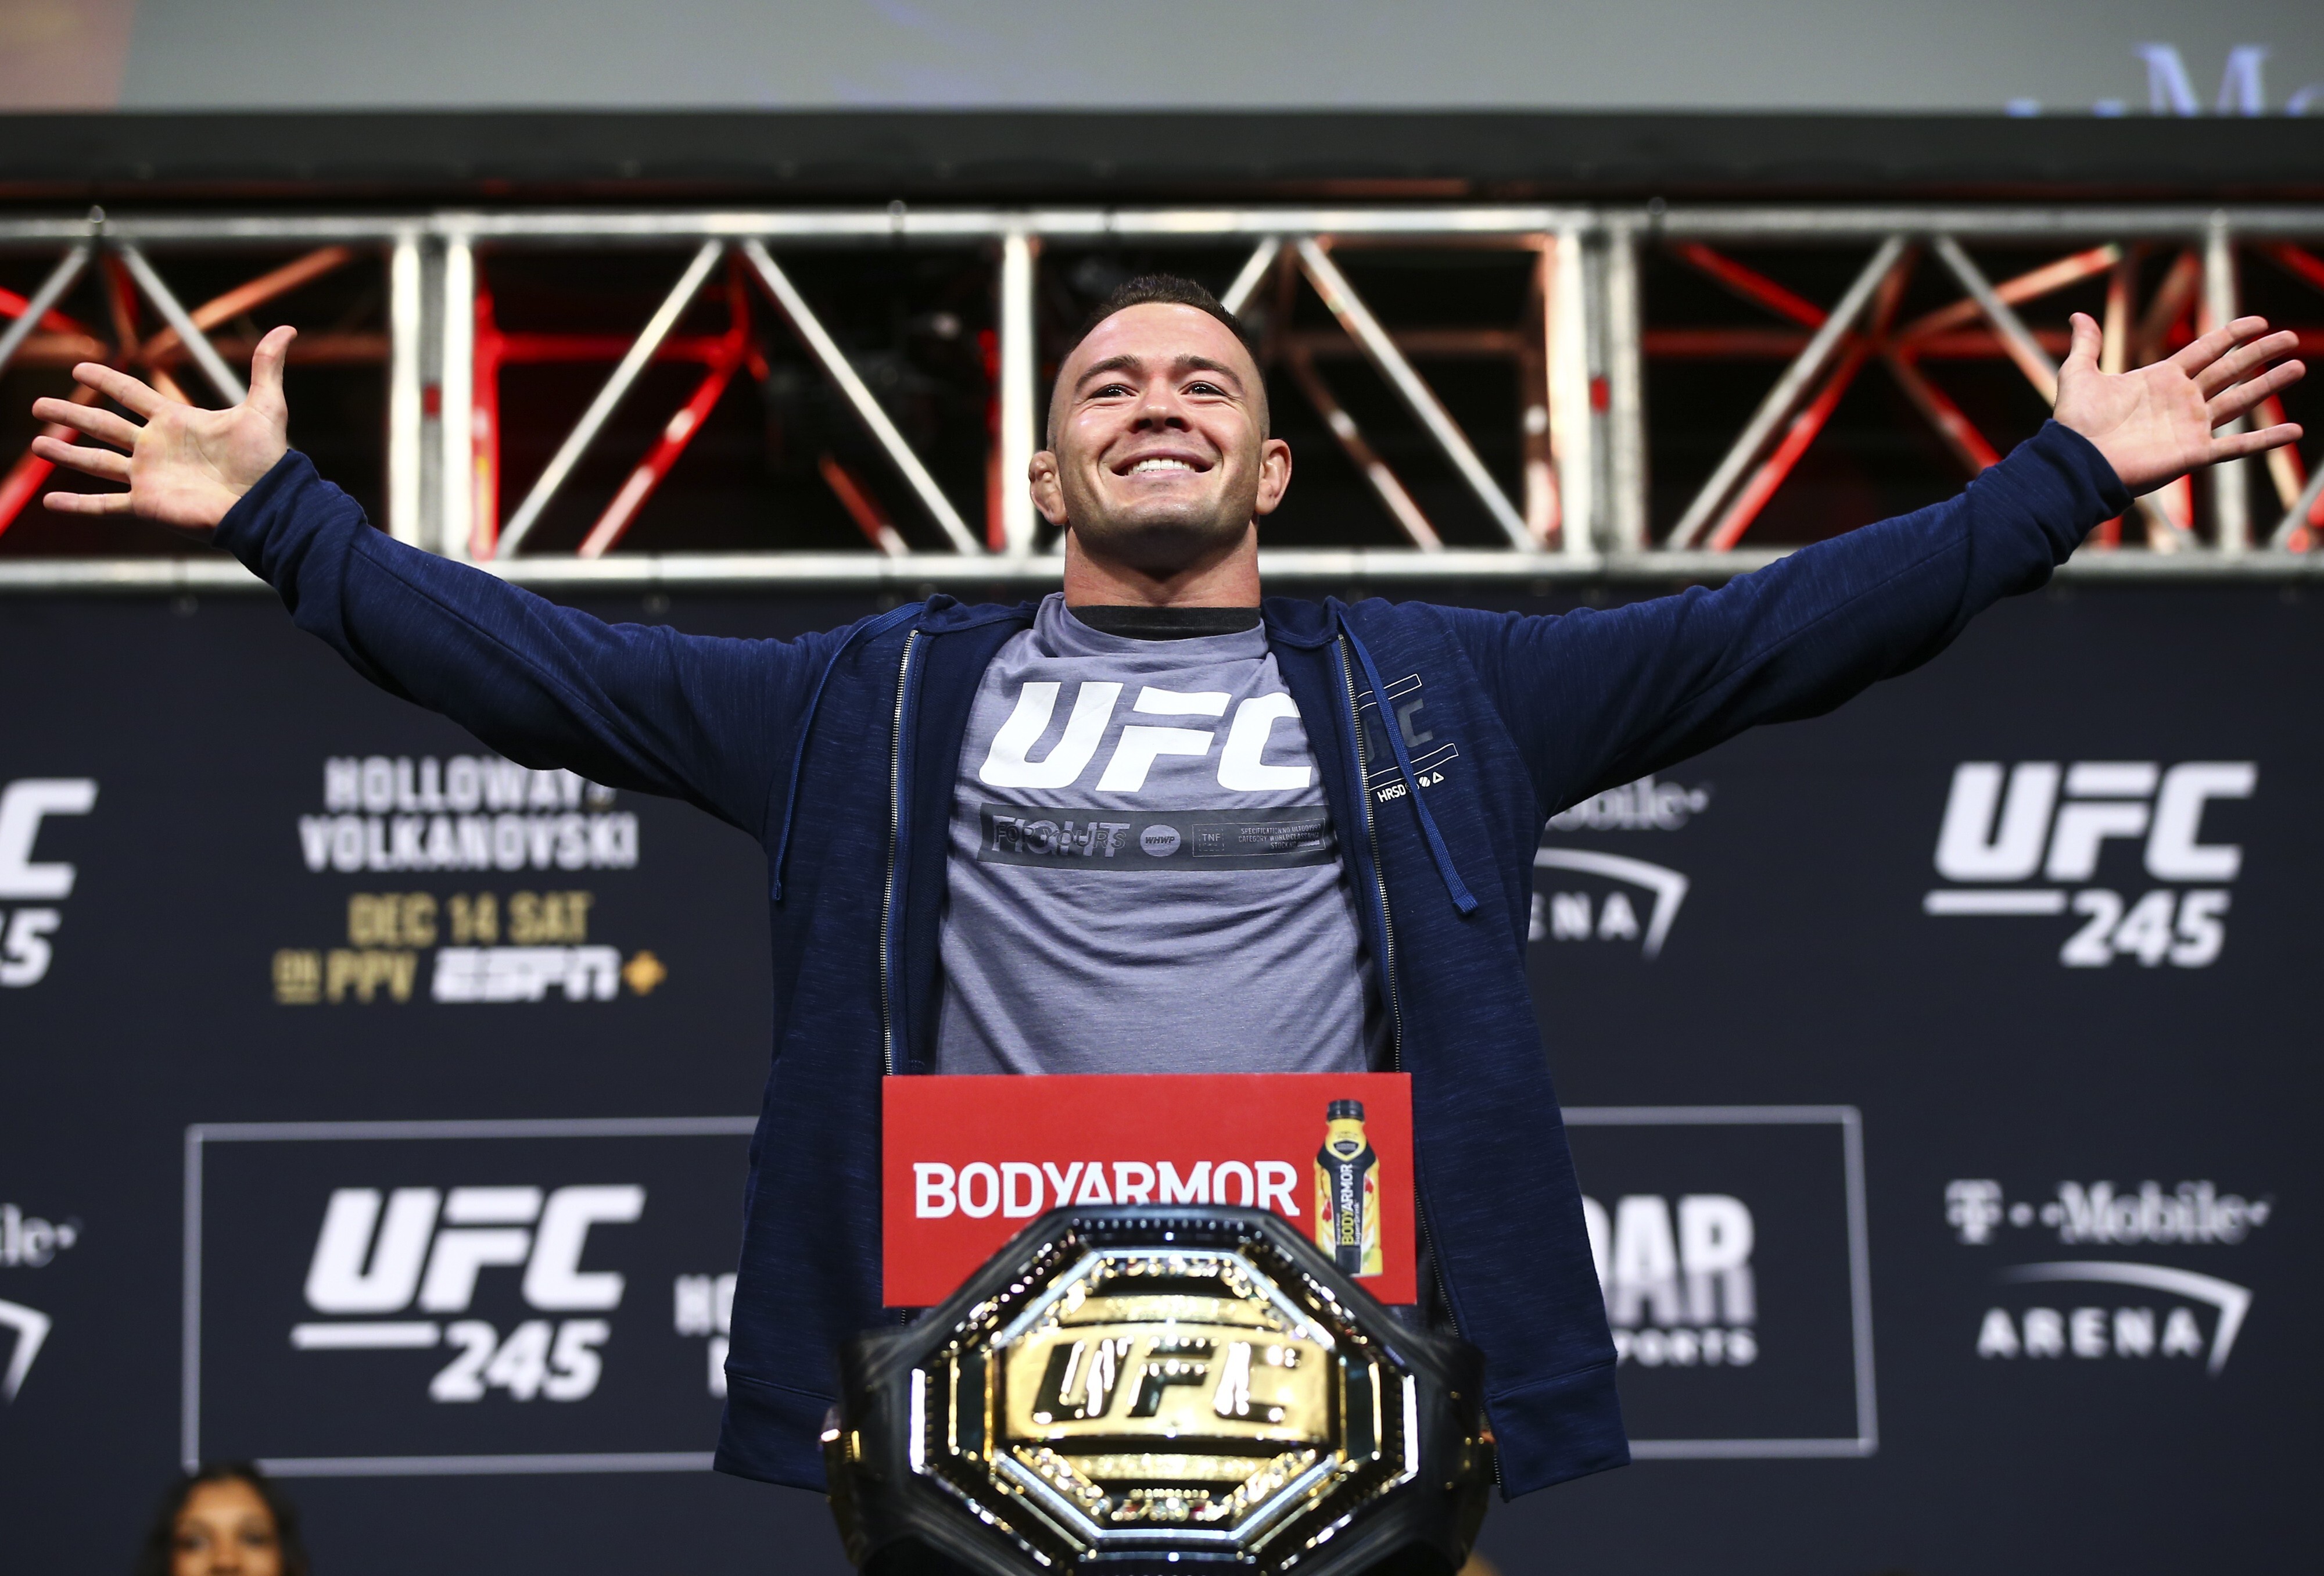 Colby Covington poses during the ceremonial weigh-in event ahead of his fight against Kamaru Usman at UFC 245. Photo: AP